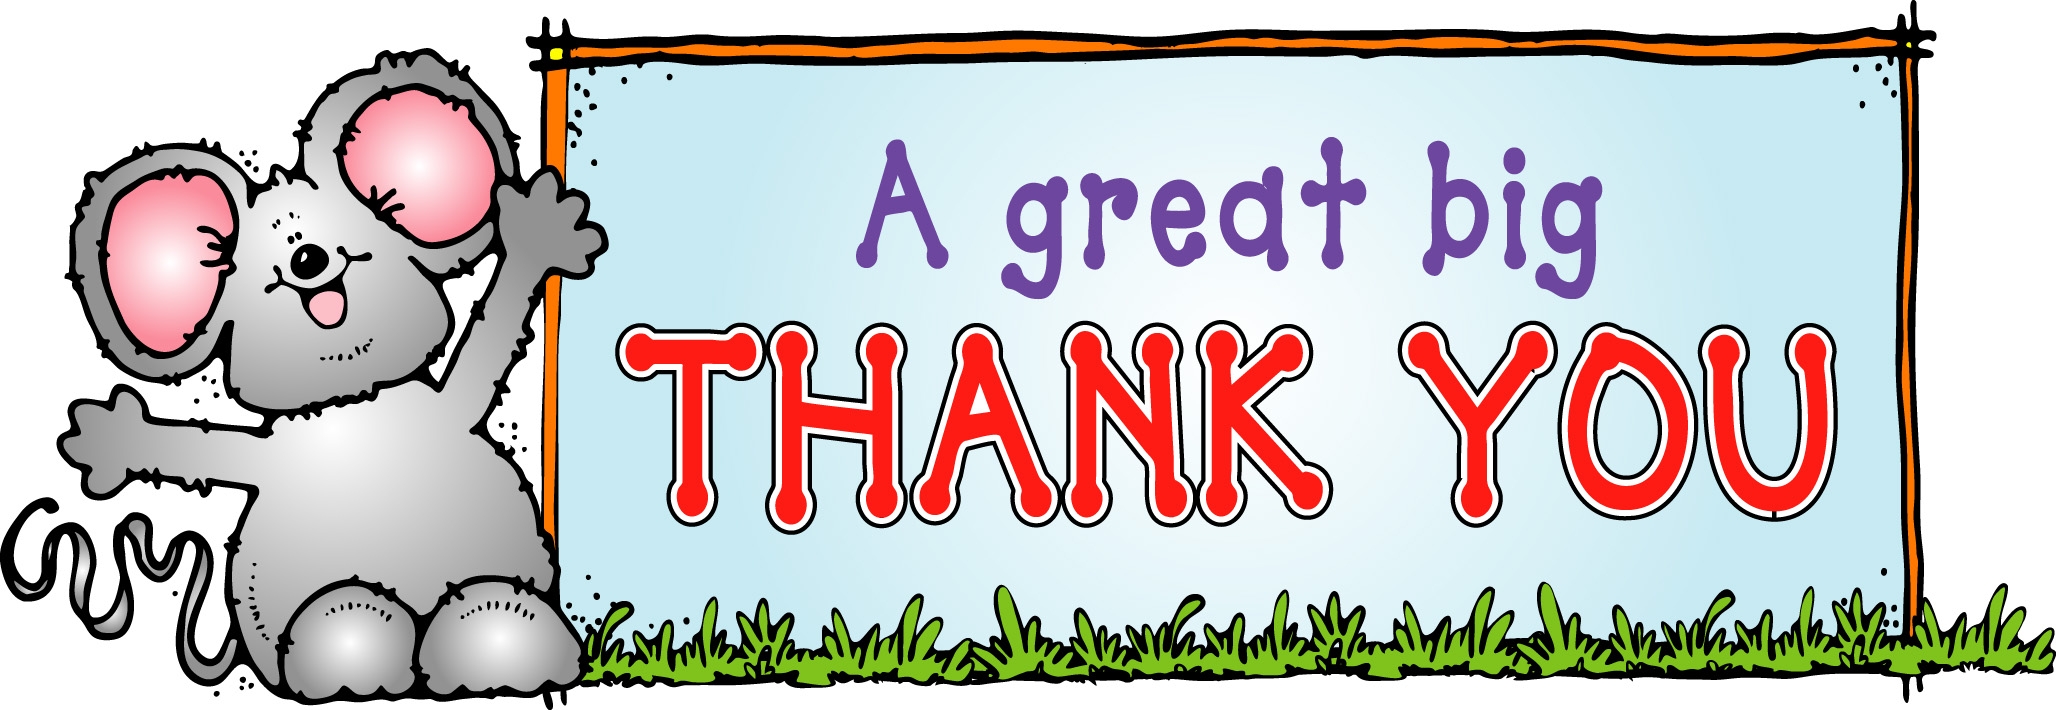 thank-you-free-clip-art-clipart-best